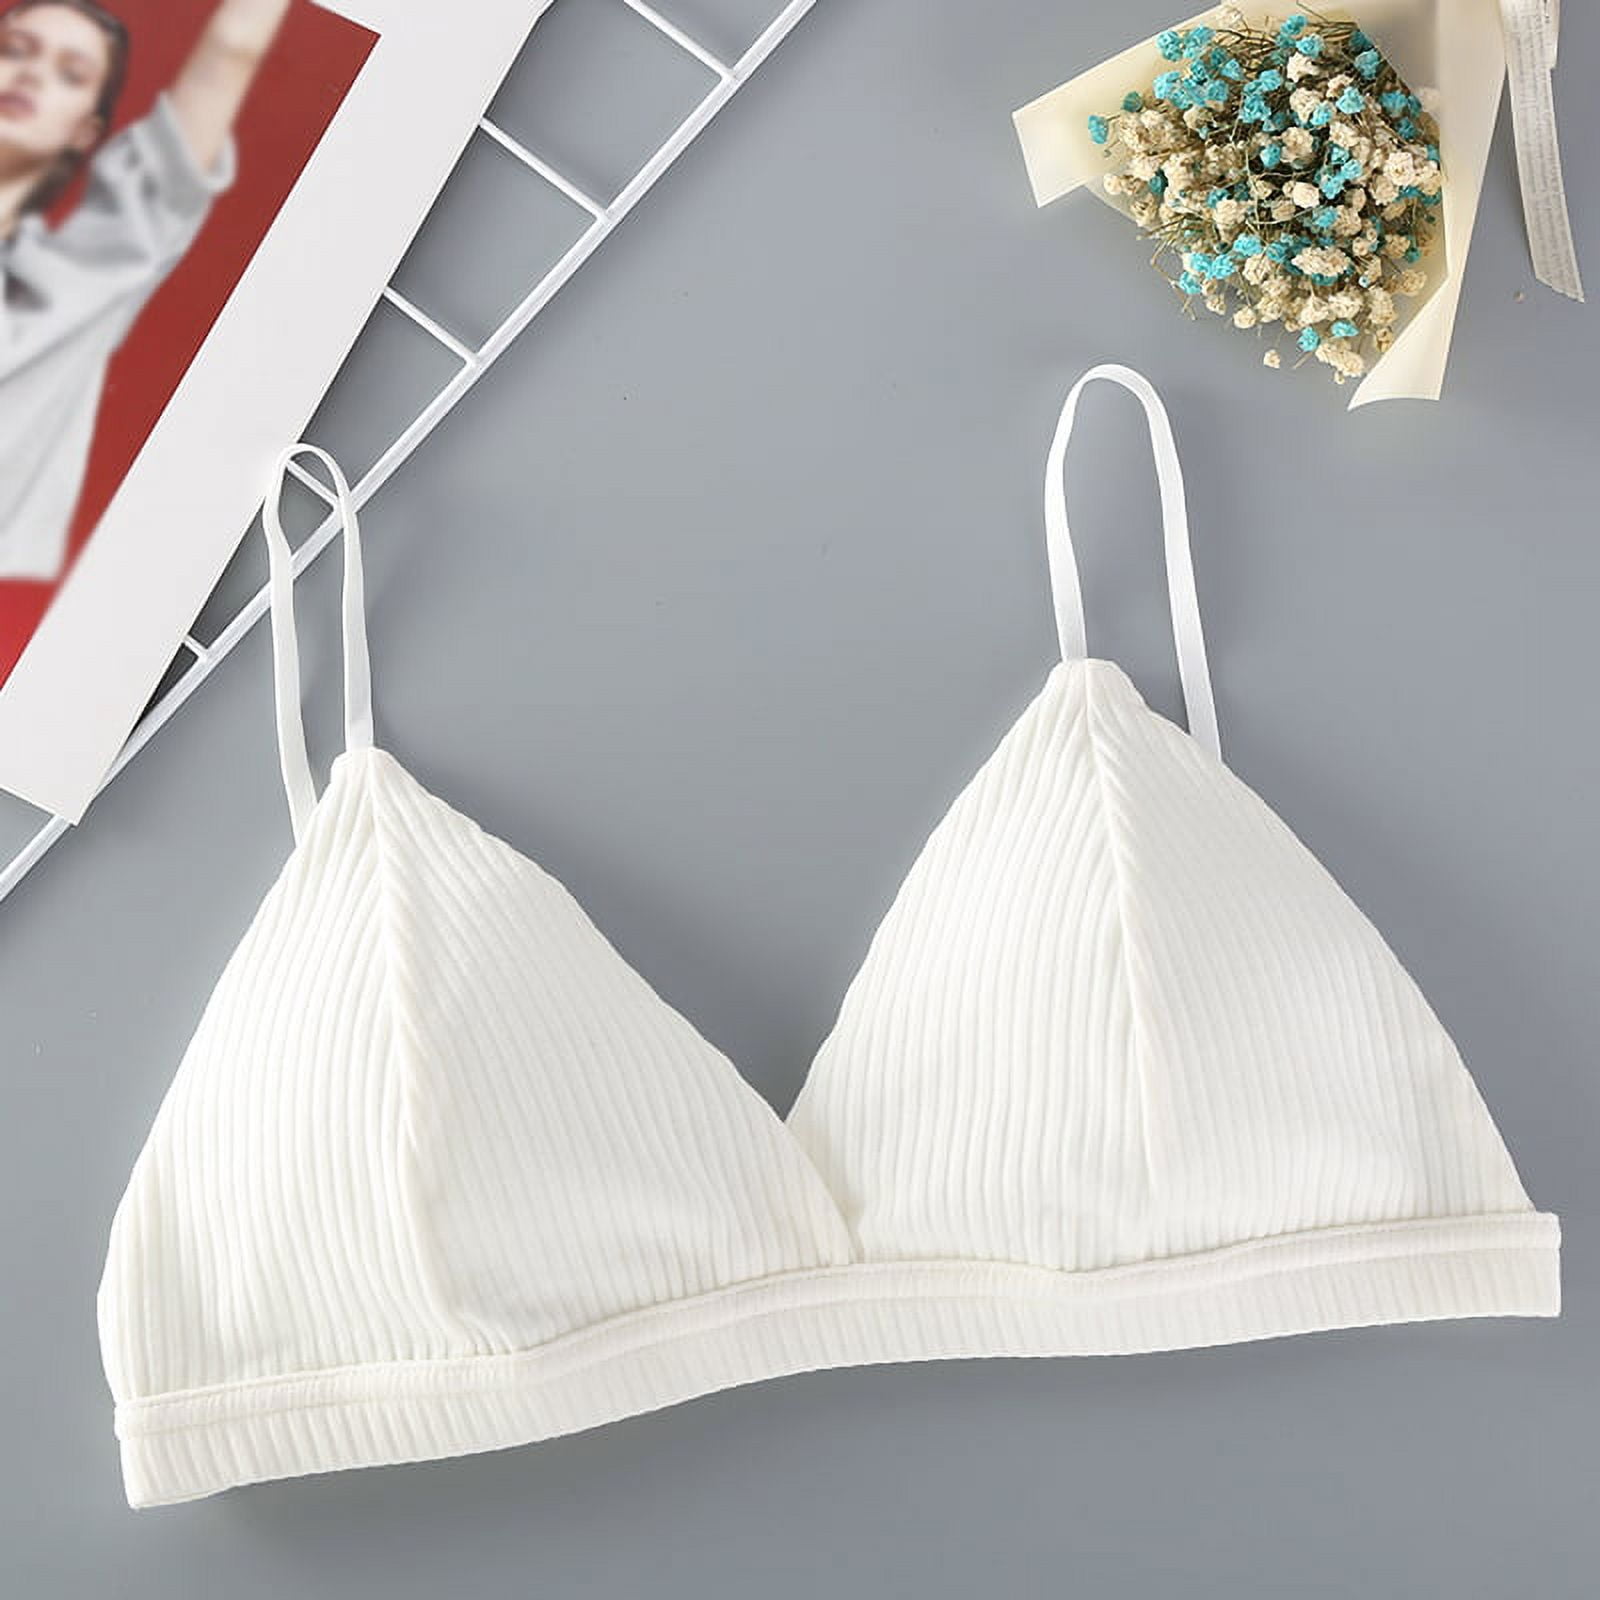 Women's Invisible Comfort Seamless Wirefree Lightly Lined Triangle Bralette  Bra 